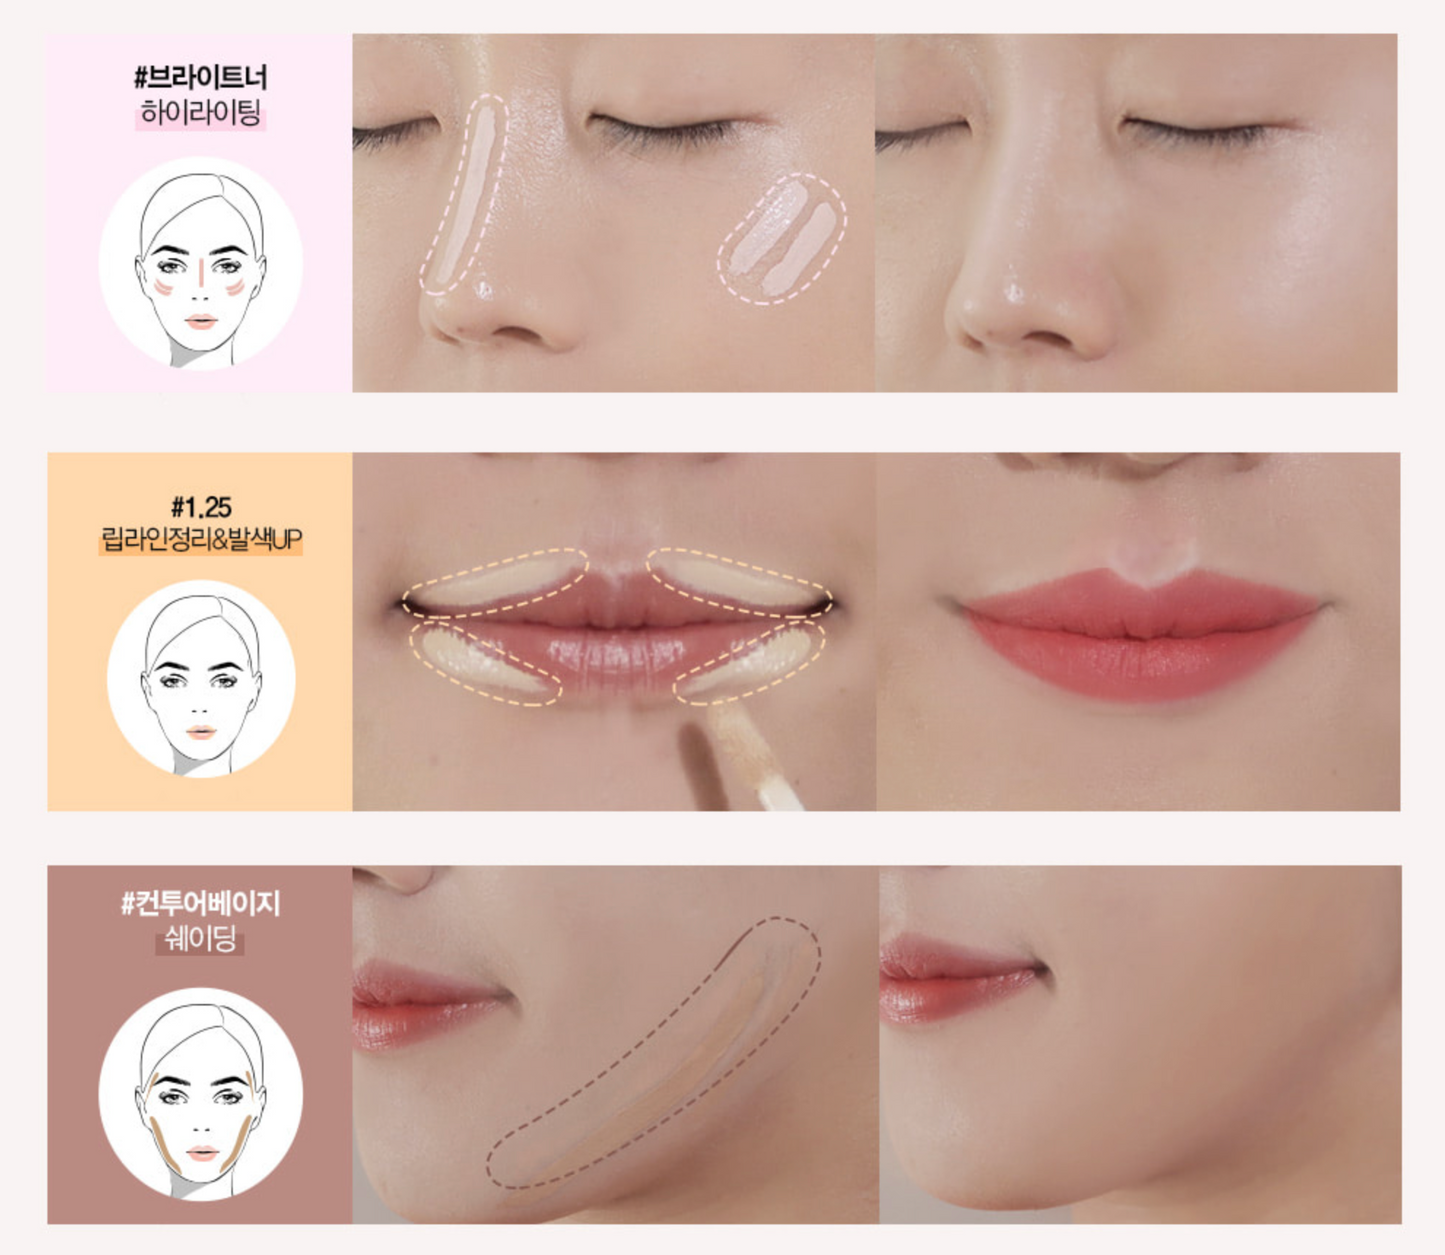 Cover Perfection Tip Concealer  SPF28/PA++